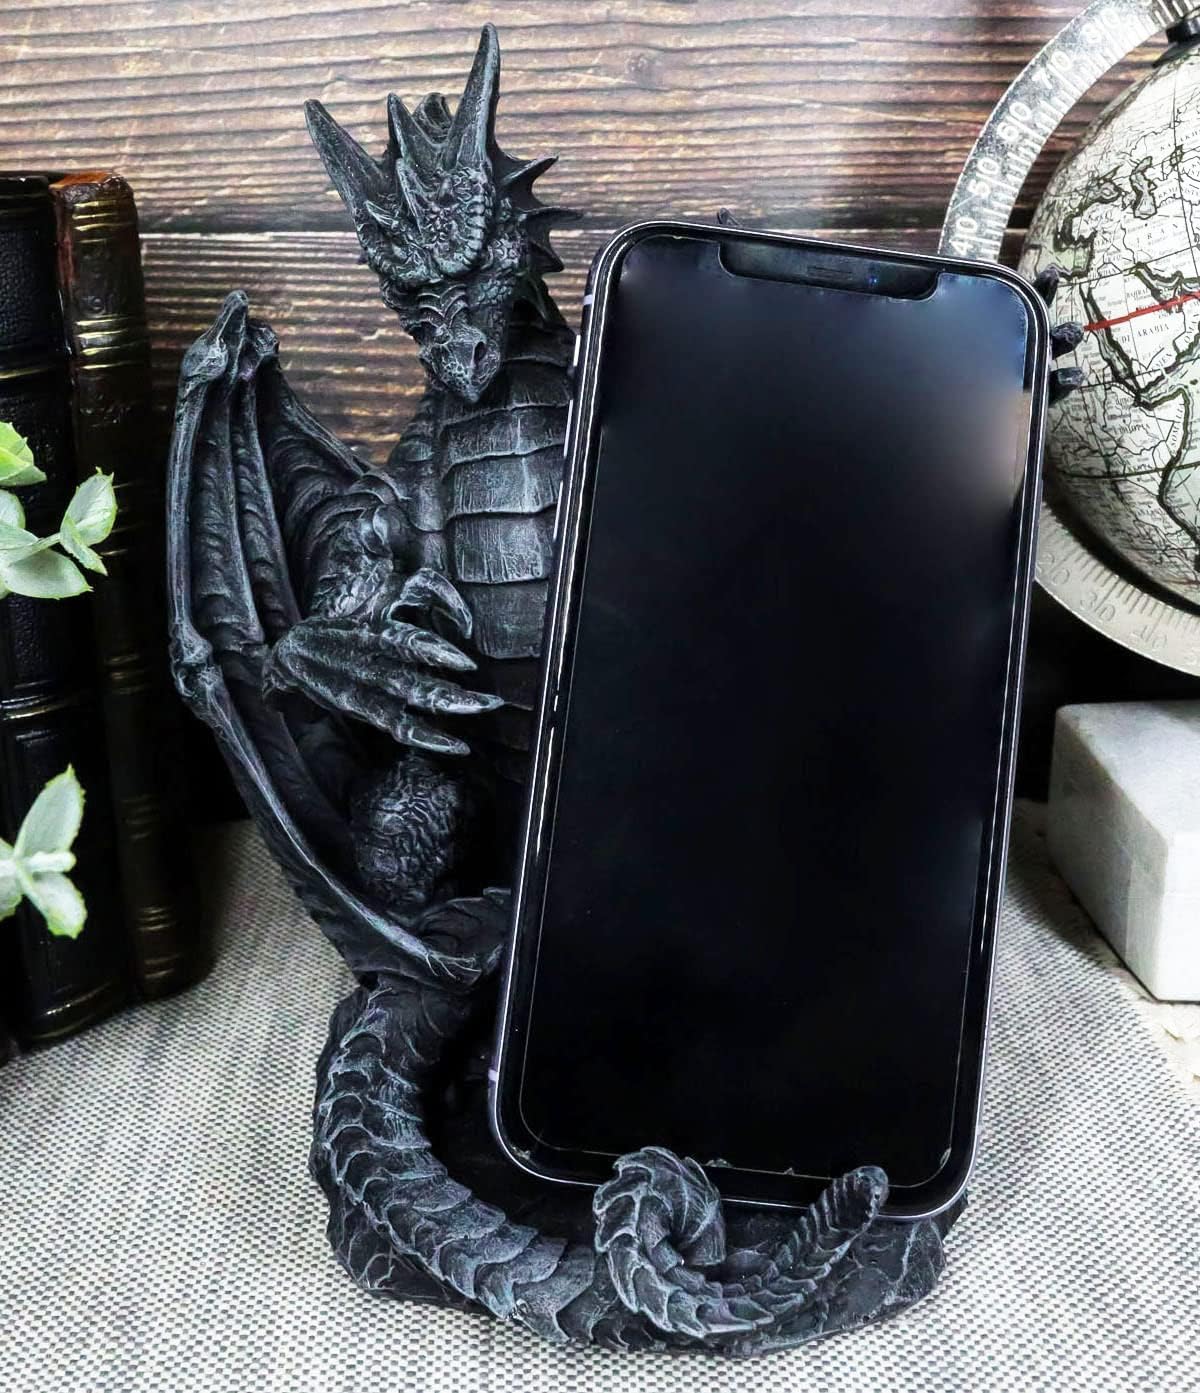 Dragon Phone Stand Holder - Standing